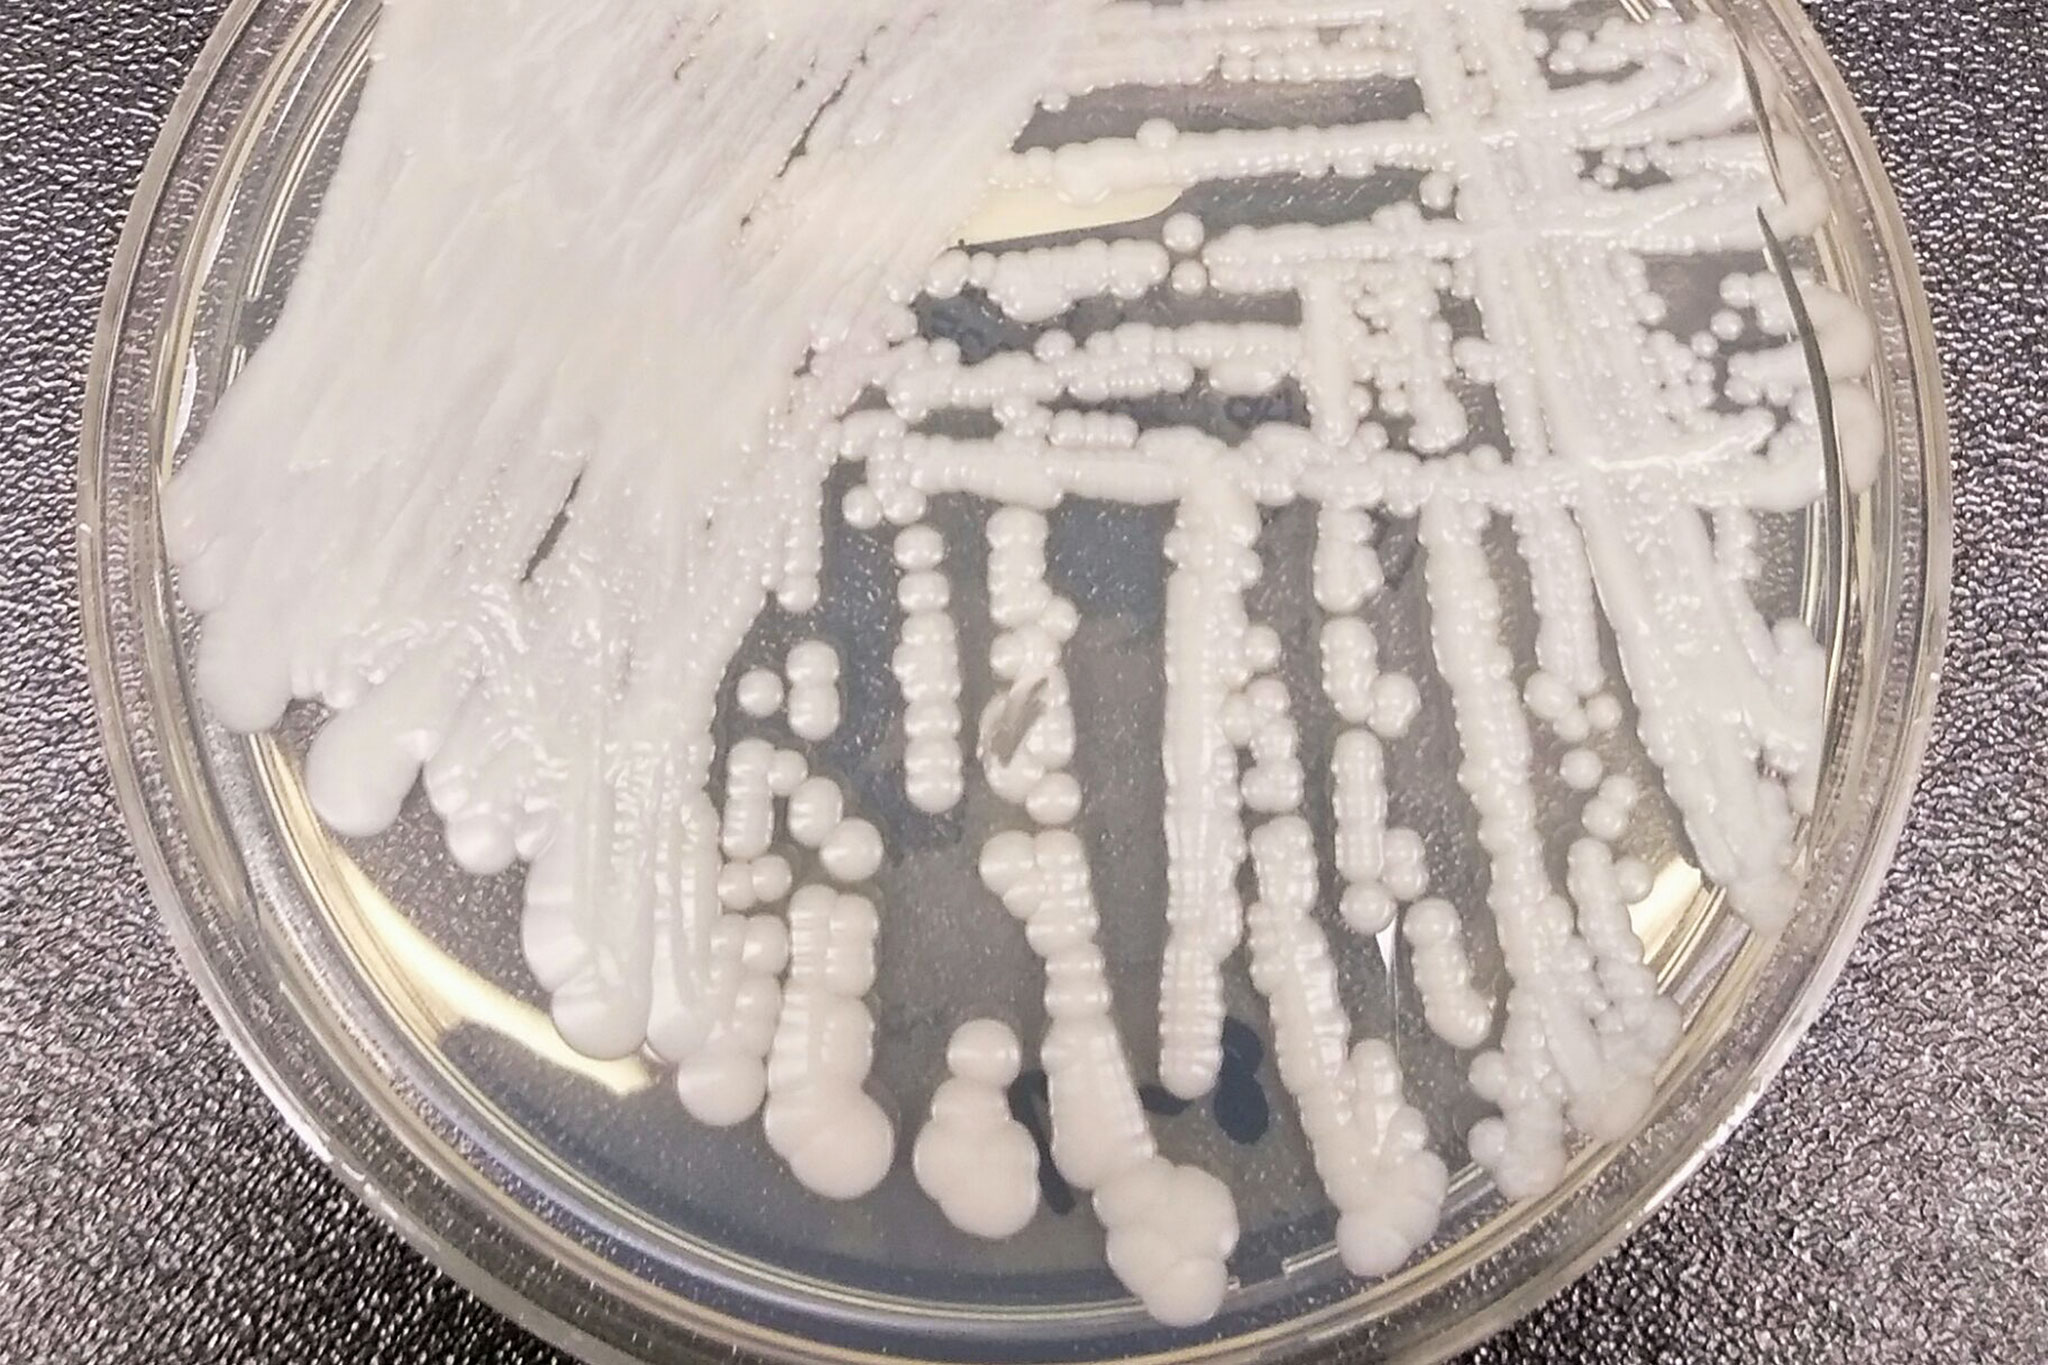 35 Americans stricken with severe fungal infection, says CDC